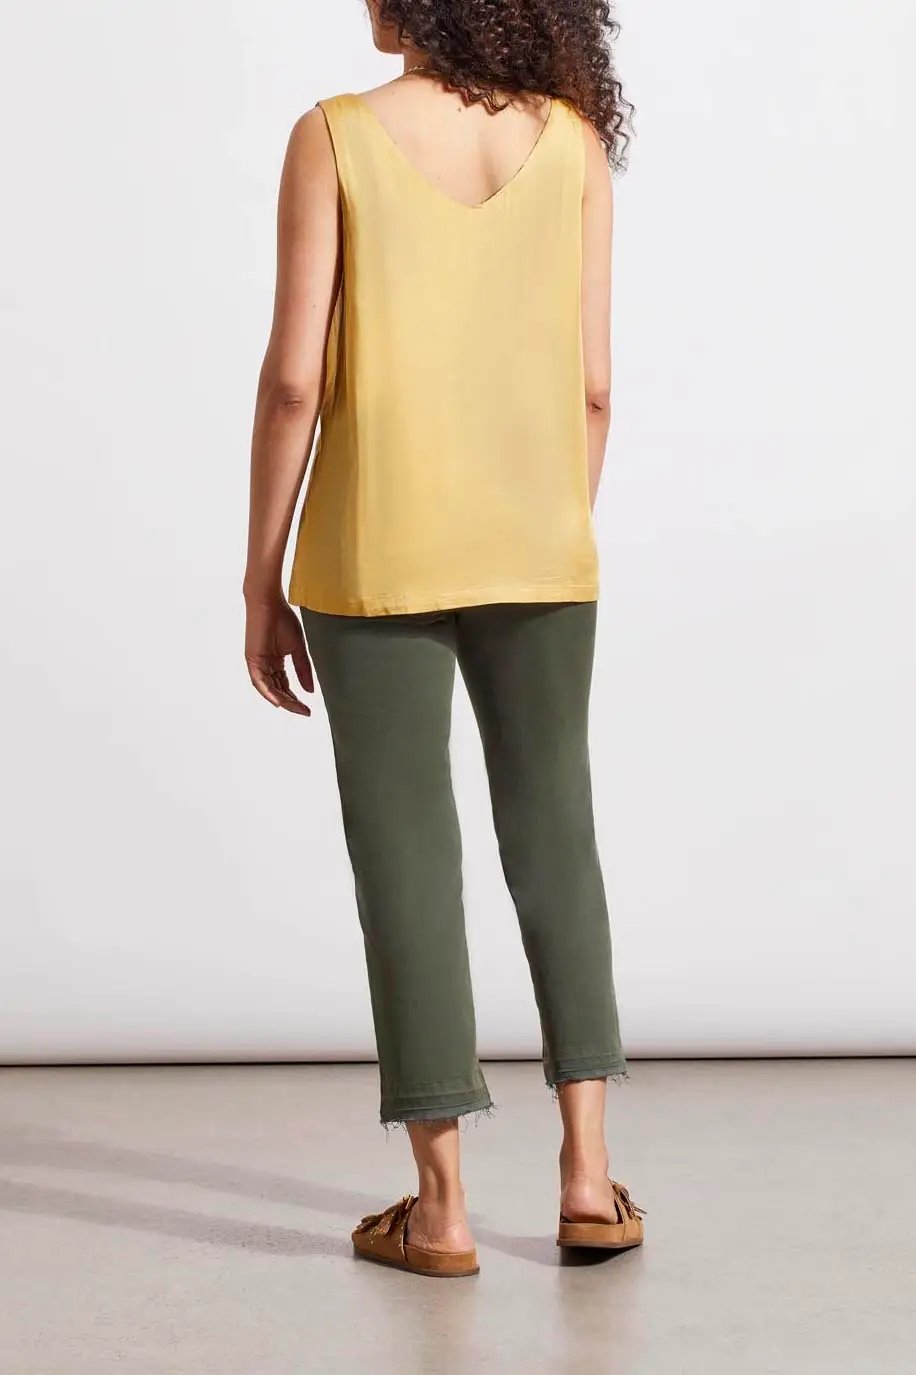 A woman in a Tribal Dijon Reversible V-Neck Cami and green jeans stands against a neutral background, accessorized with a gold necklace and brown sandals.